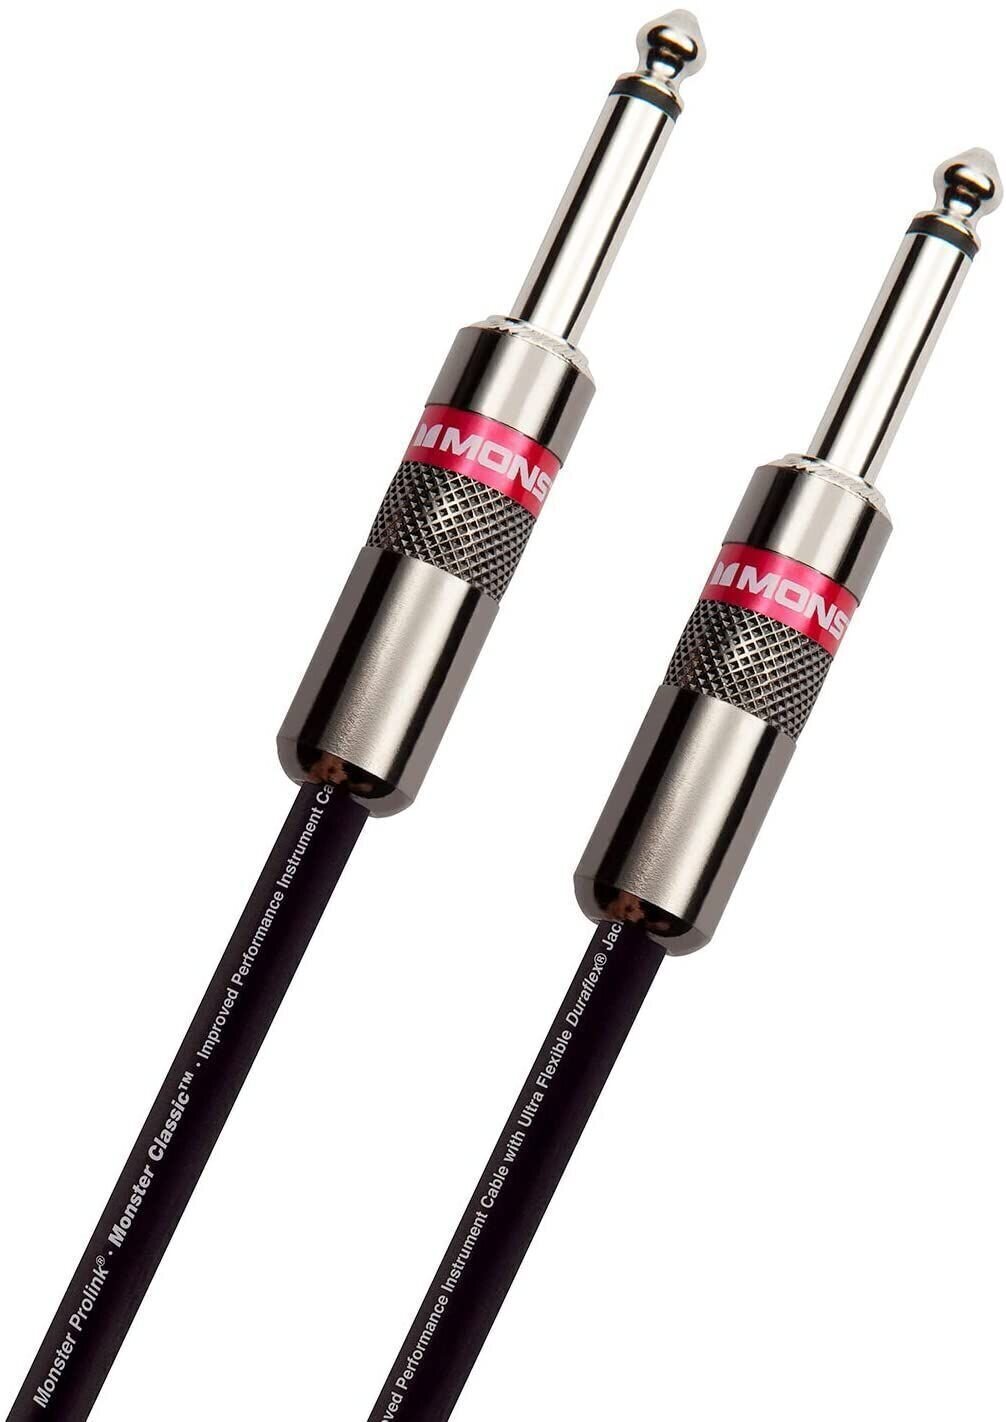 Cabo do instrumento Monster Cable Prolink Classic 21FT Instrument Cable Preto 6,4 m Reto - Reto